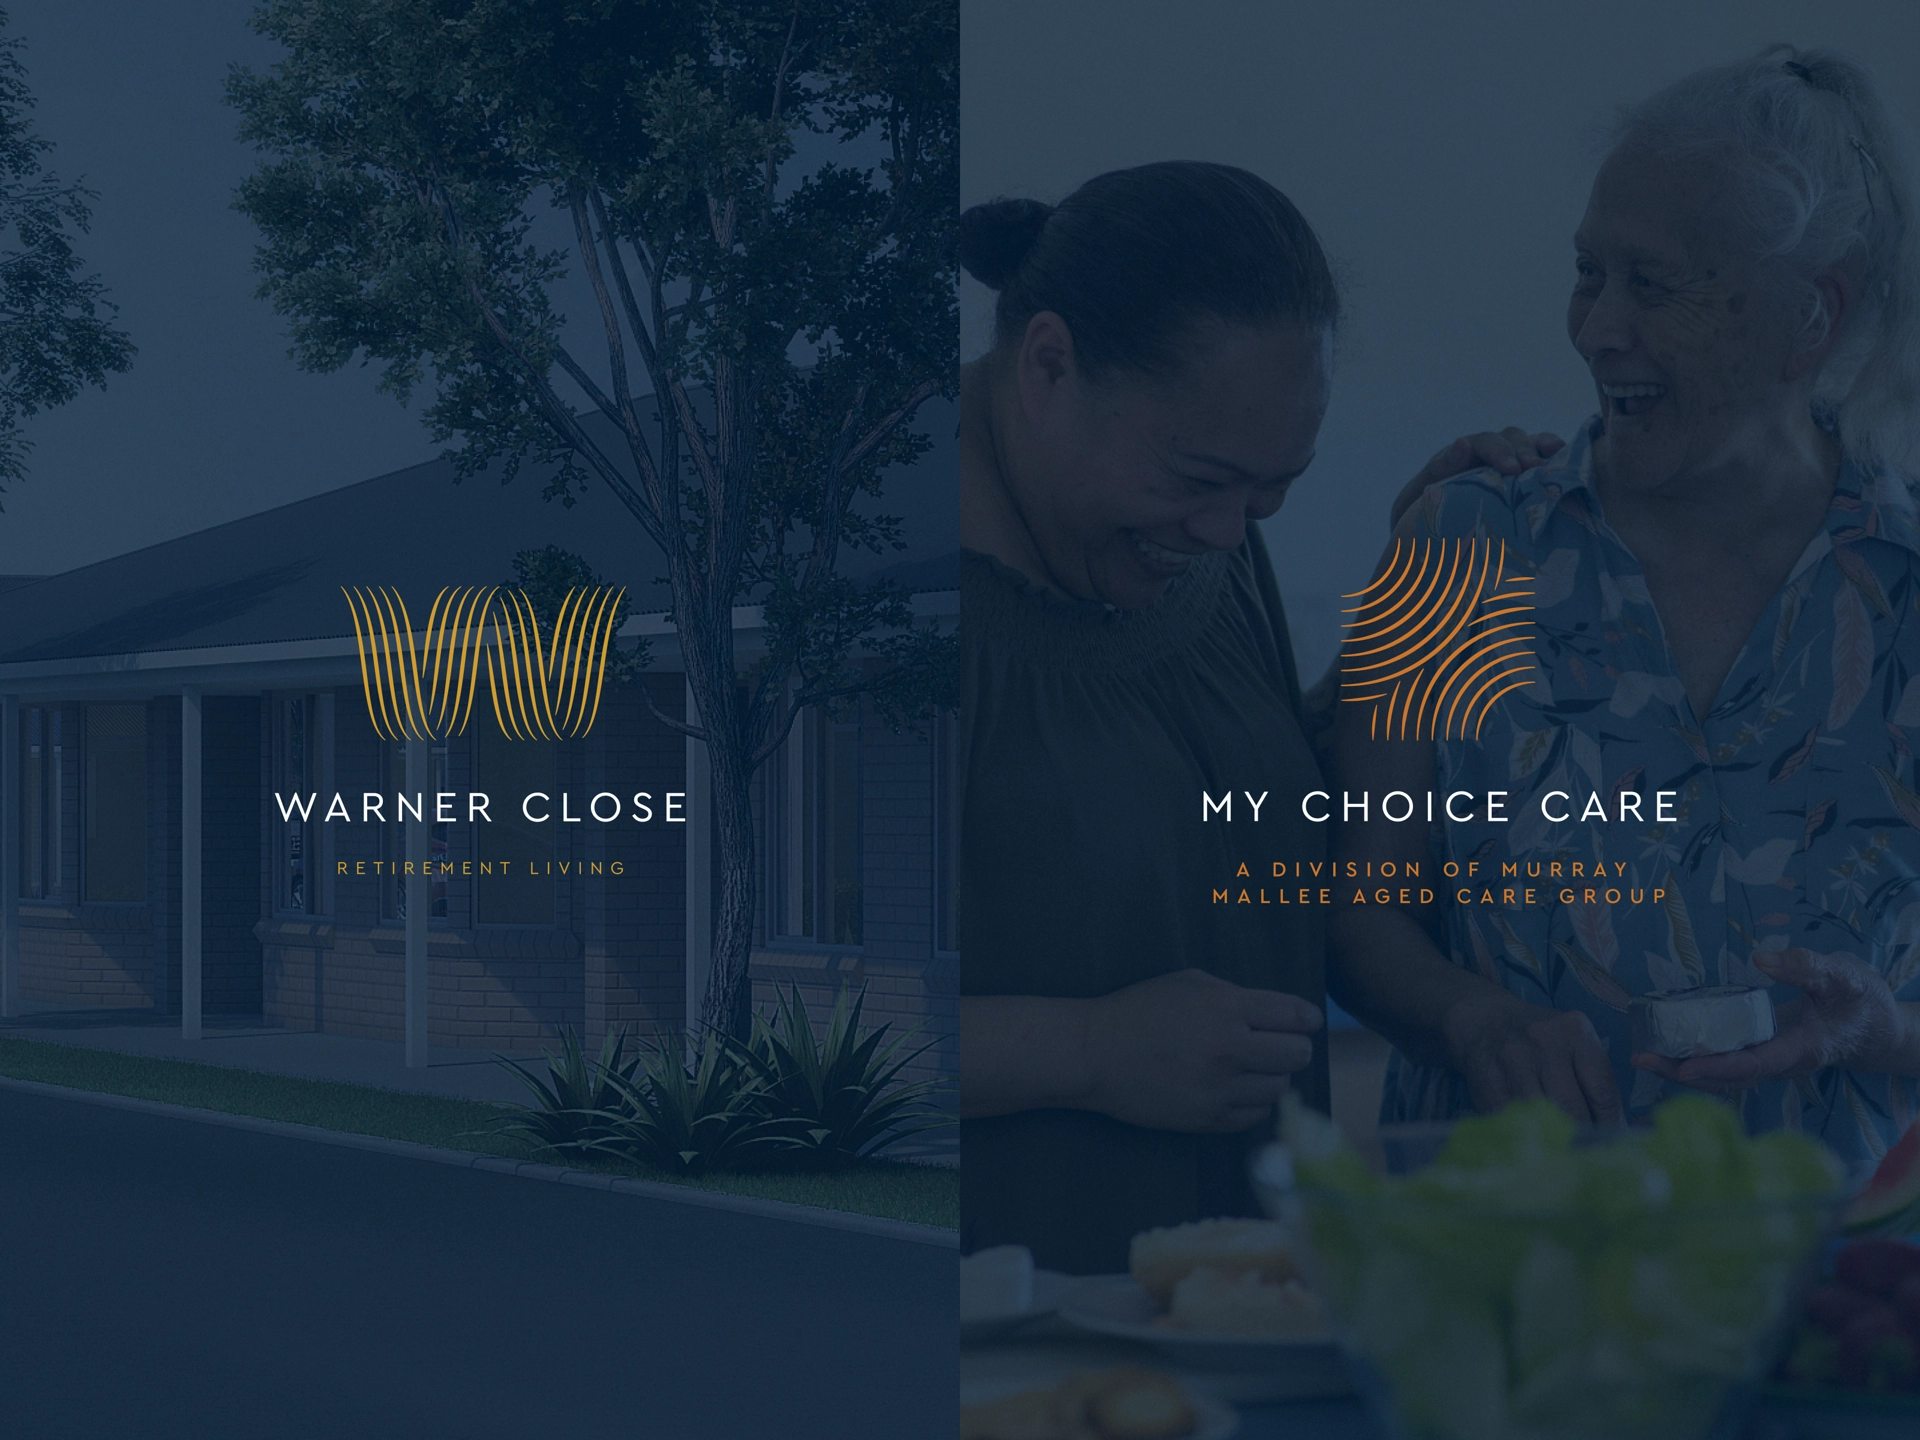 Murray Mallee Aged Care Group